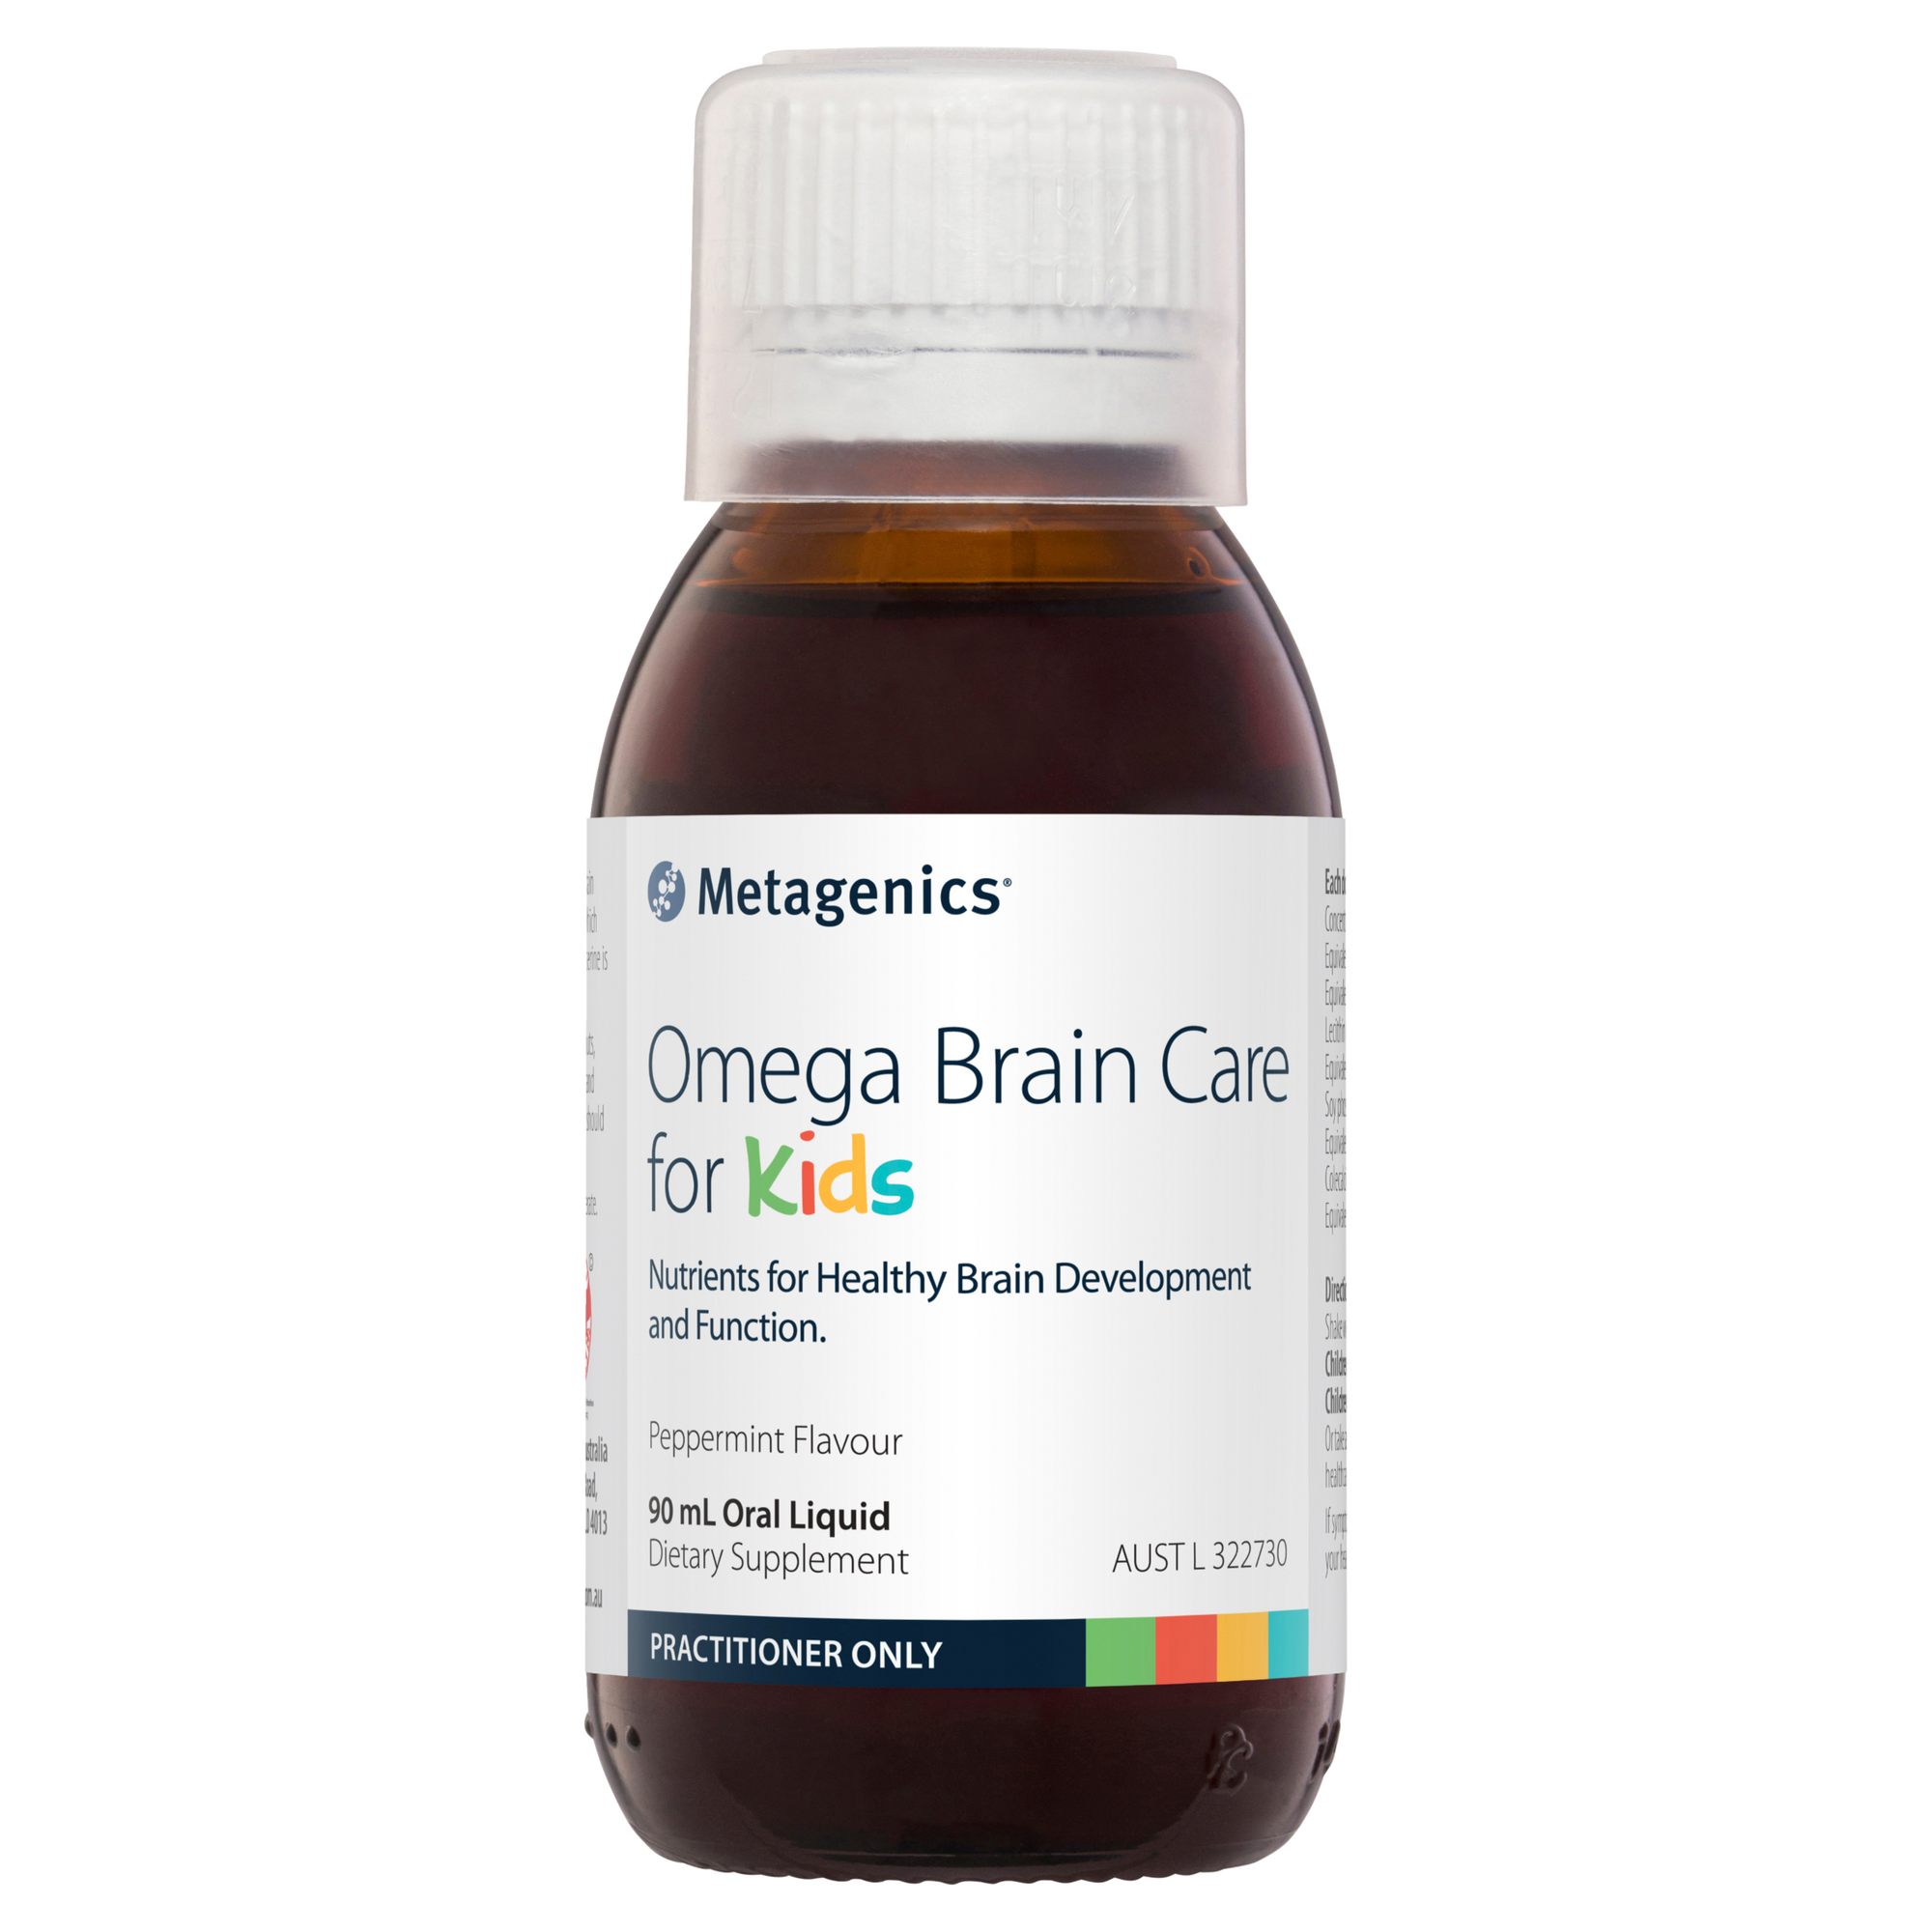 Metagenics Omega Brain Care for Kids Oral Liquid Peppermint Flavour 90ml